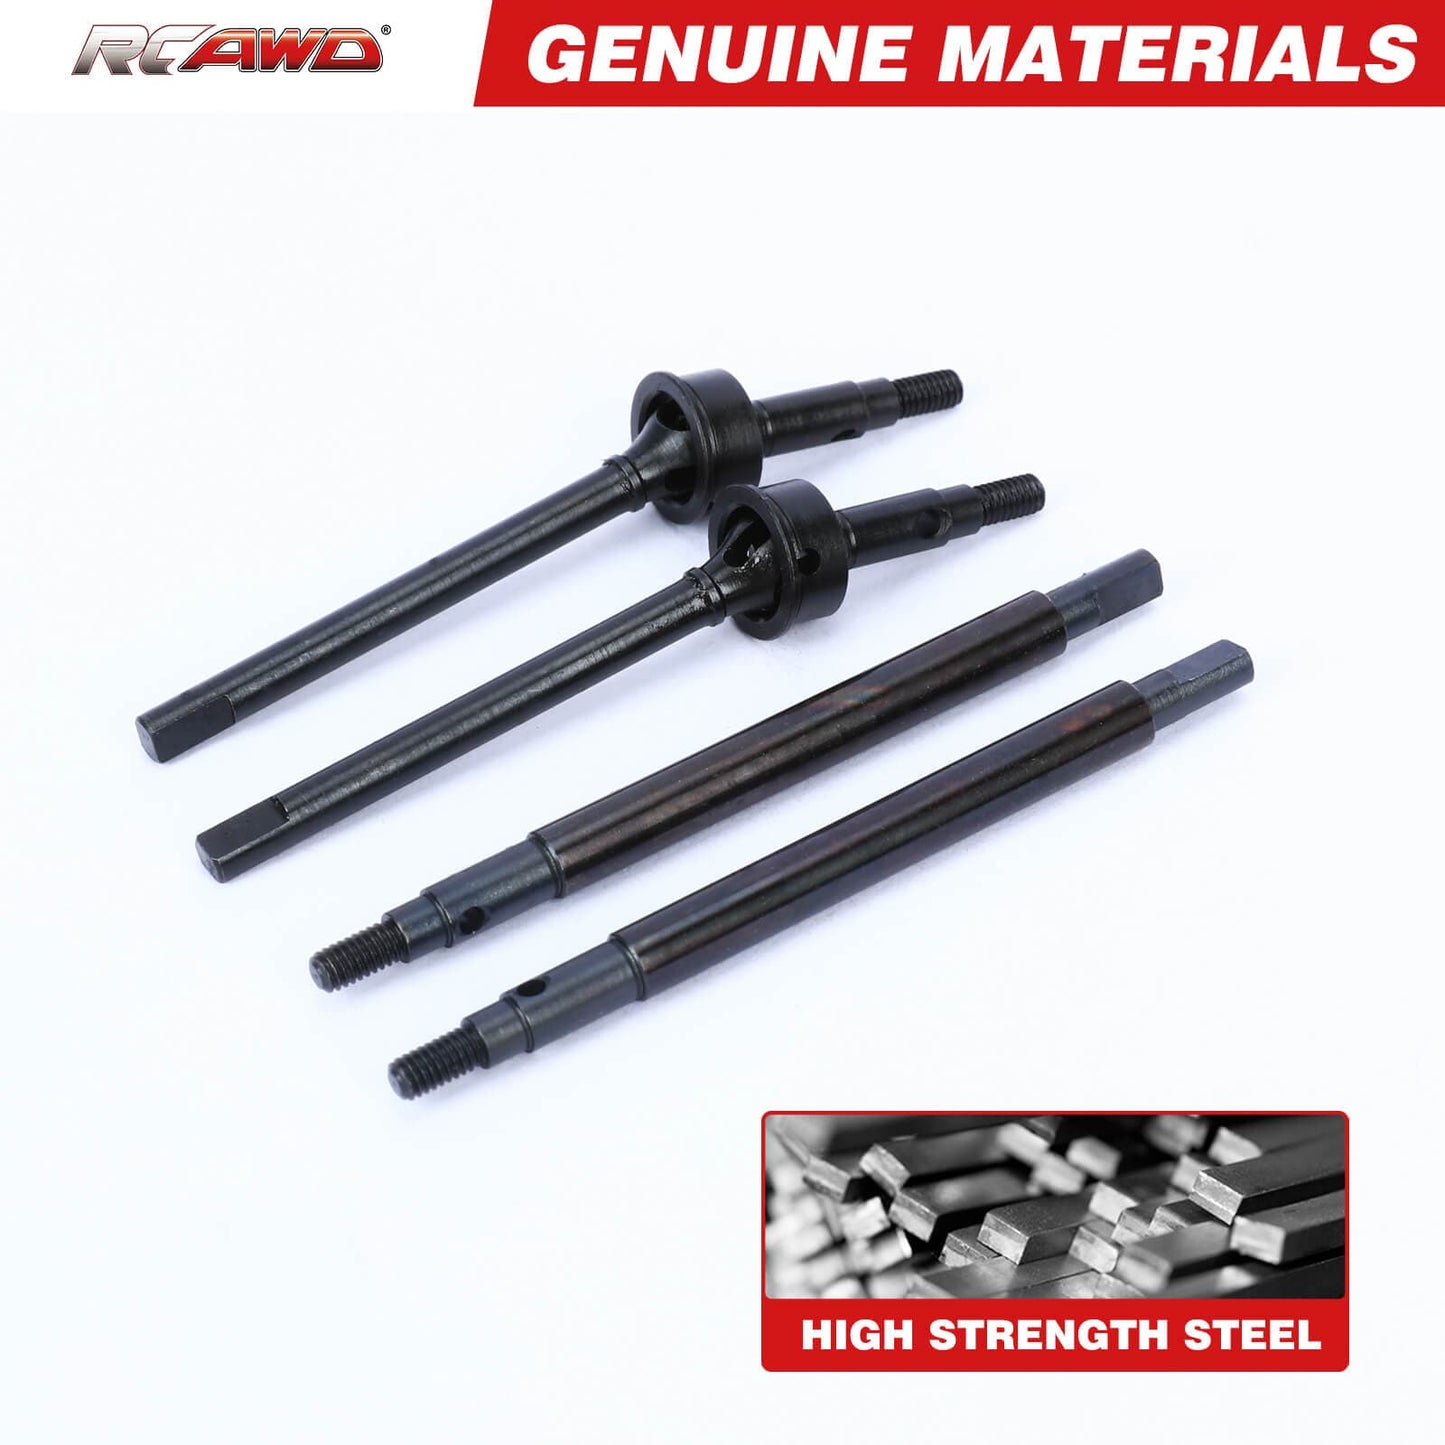 RCAWD TRXXAS TRX4M RCAWD Front Rear Driveshaft Axles for Trx4m Upgrades